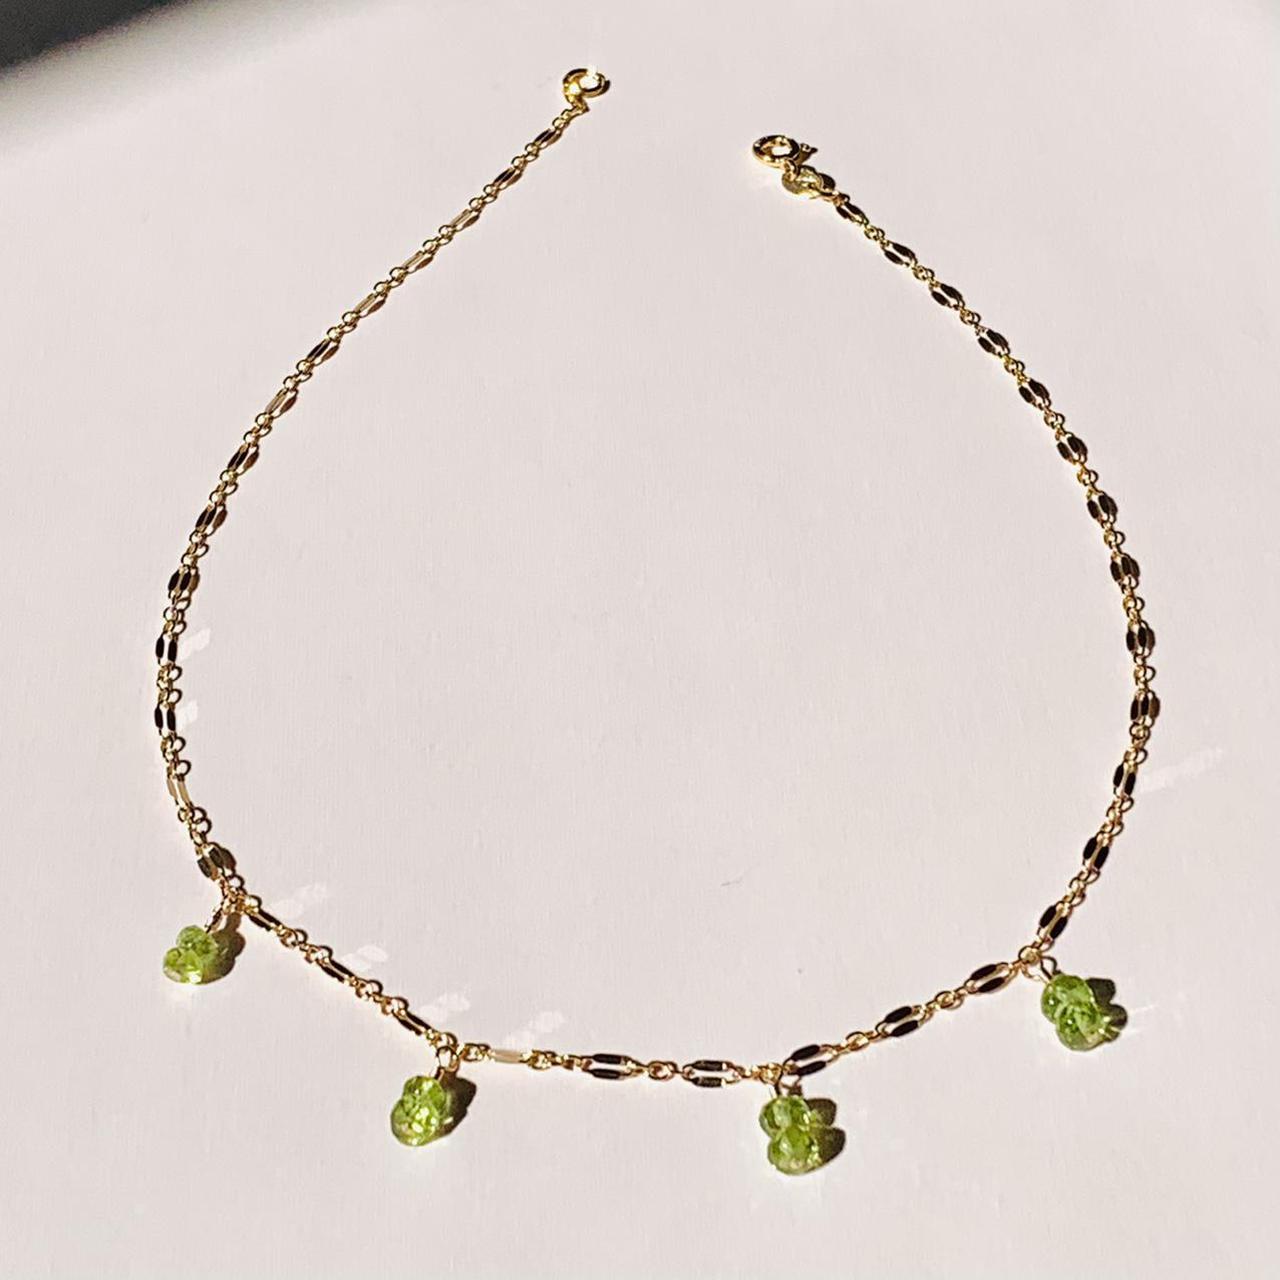 Product Image 3 - Peridot Necklace 

Material: 14K Gold